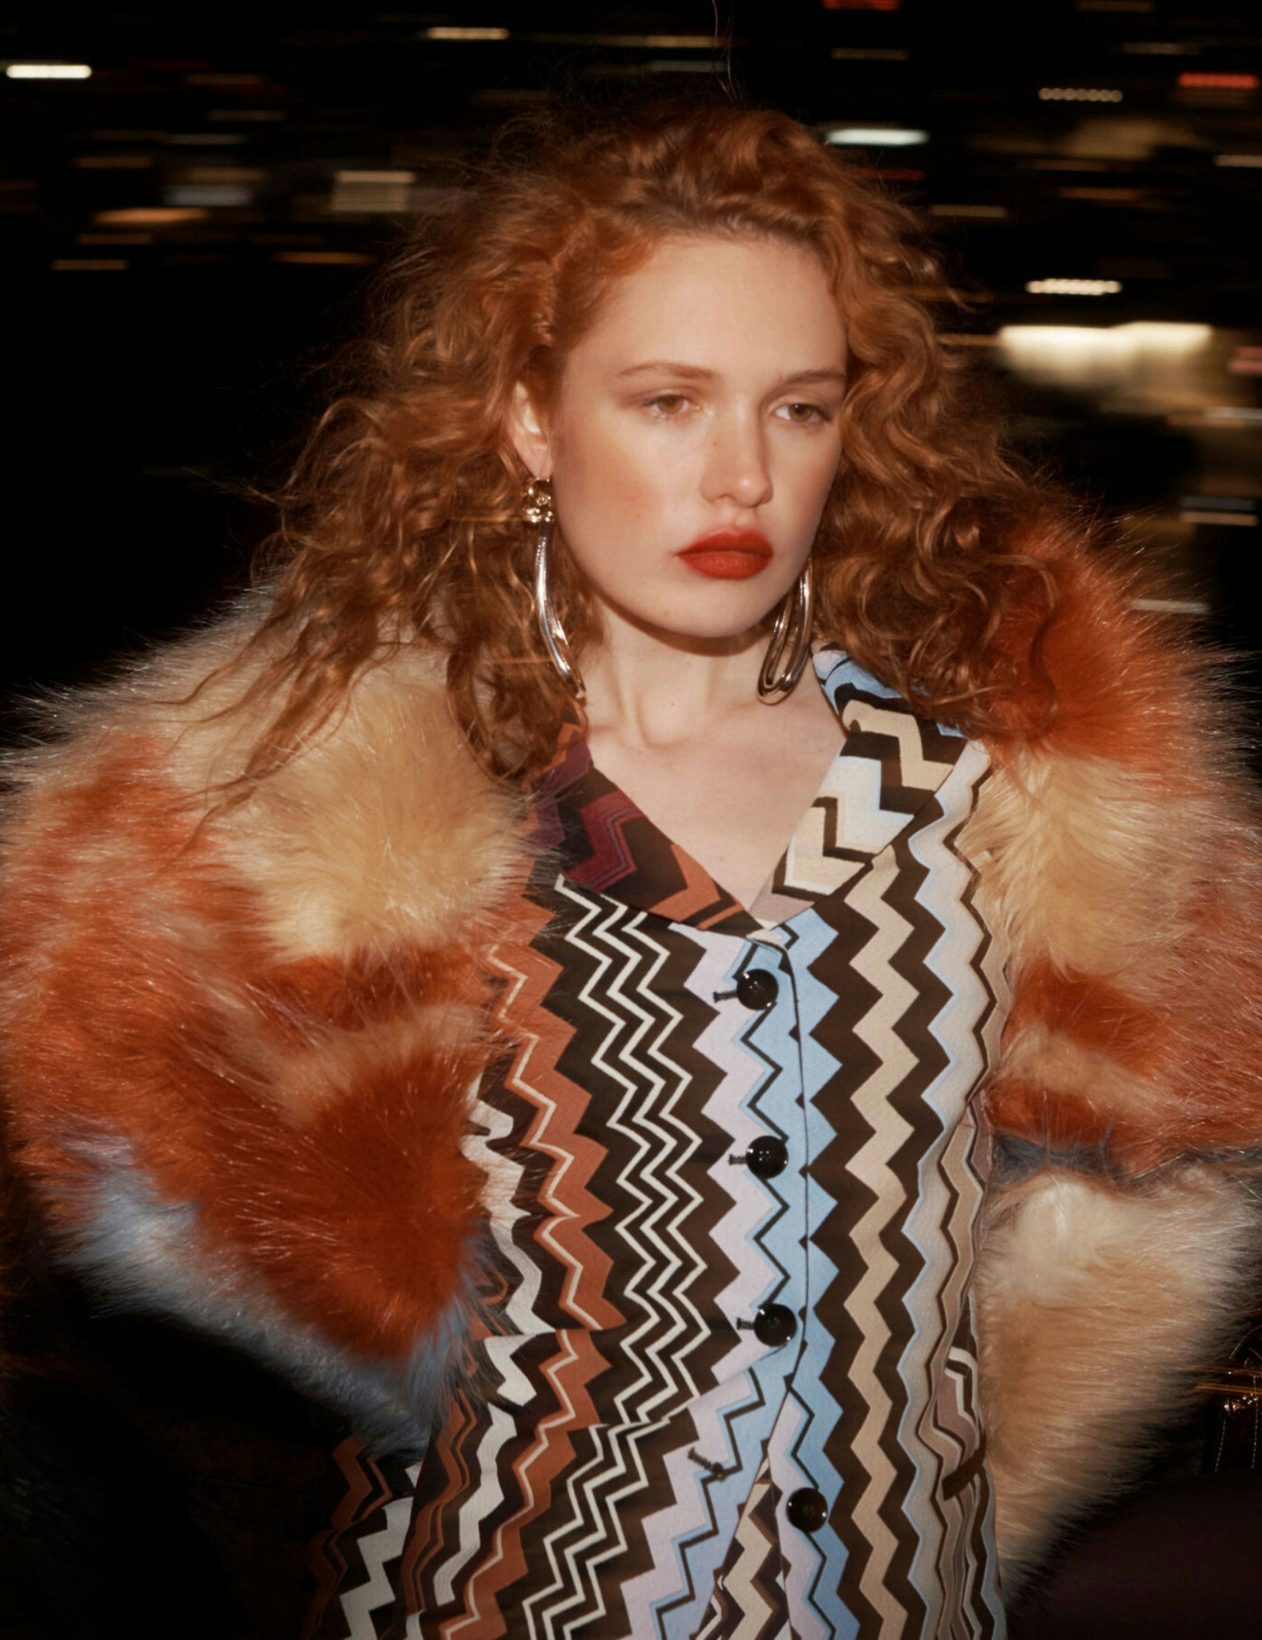 Missoni appoints Rothschild Bank to evaluate potential sale